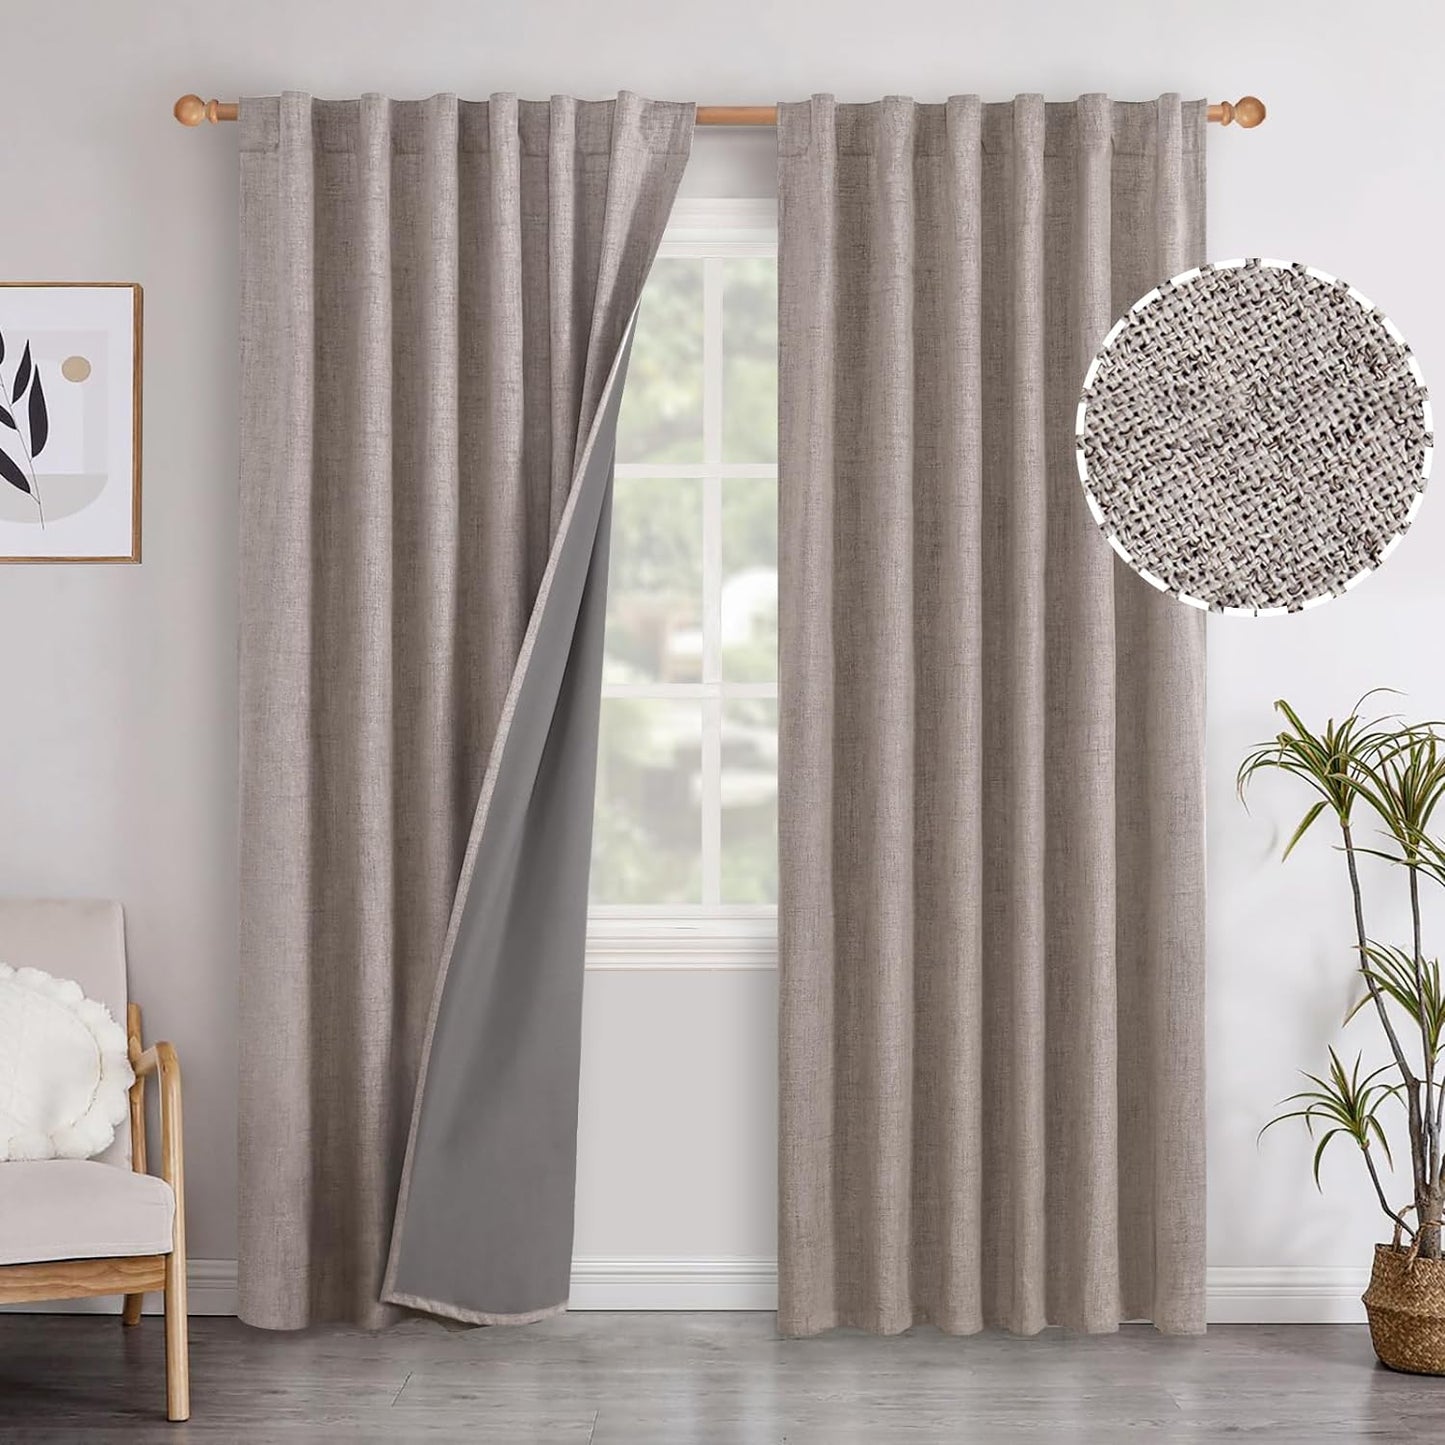 Youngstex Linen Blackout Curtains 63 Inch Length, Grommet Darkening Bedroom Curtains Burlap Linen Window Drapes Thermal Insulated for Basement Summer Heat, 2 Panels, 52 X 63 Inch, Beige  YoungsTex Back Tab/Burlap 52W X 95L 